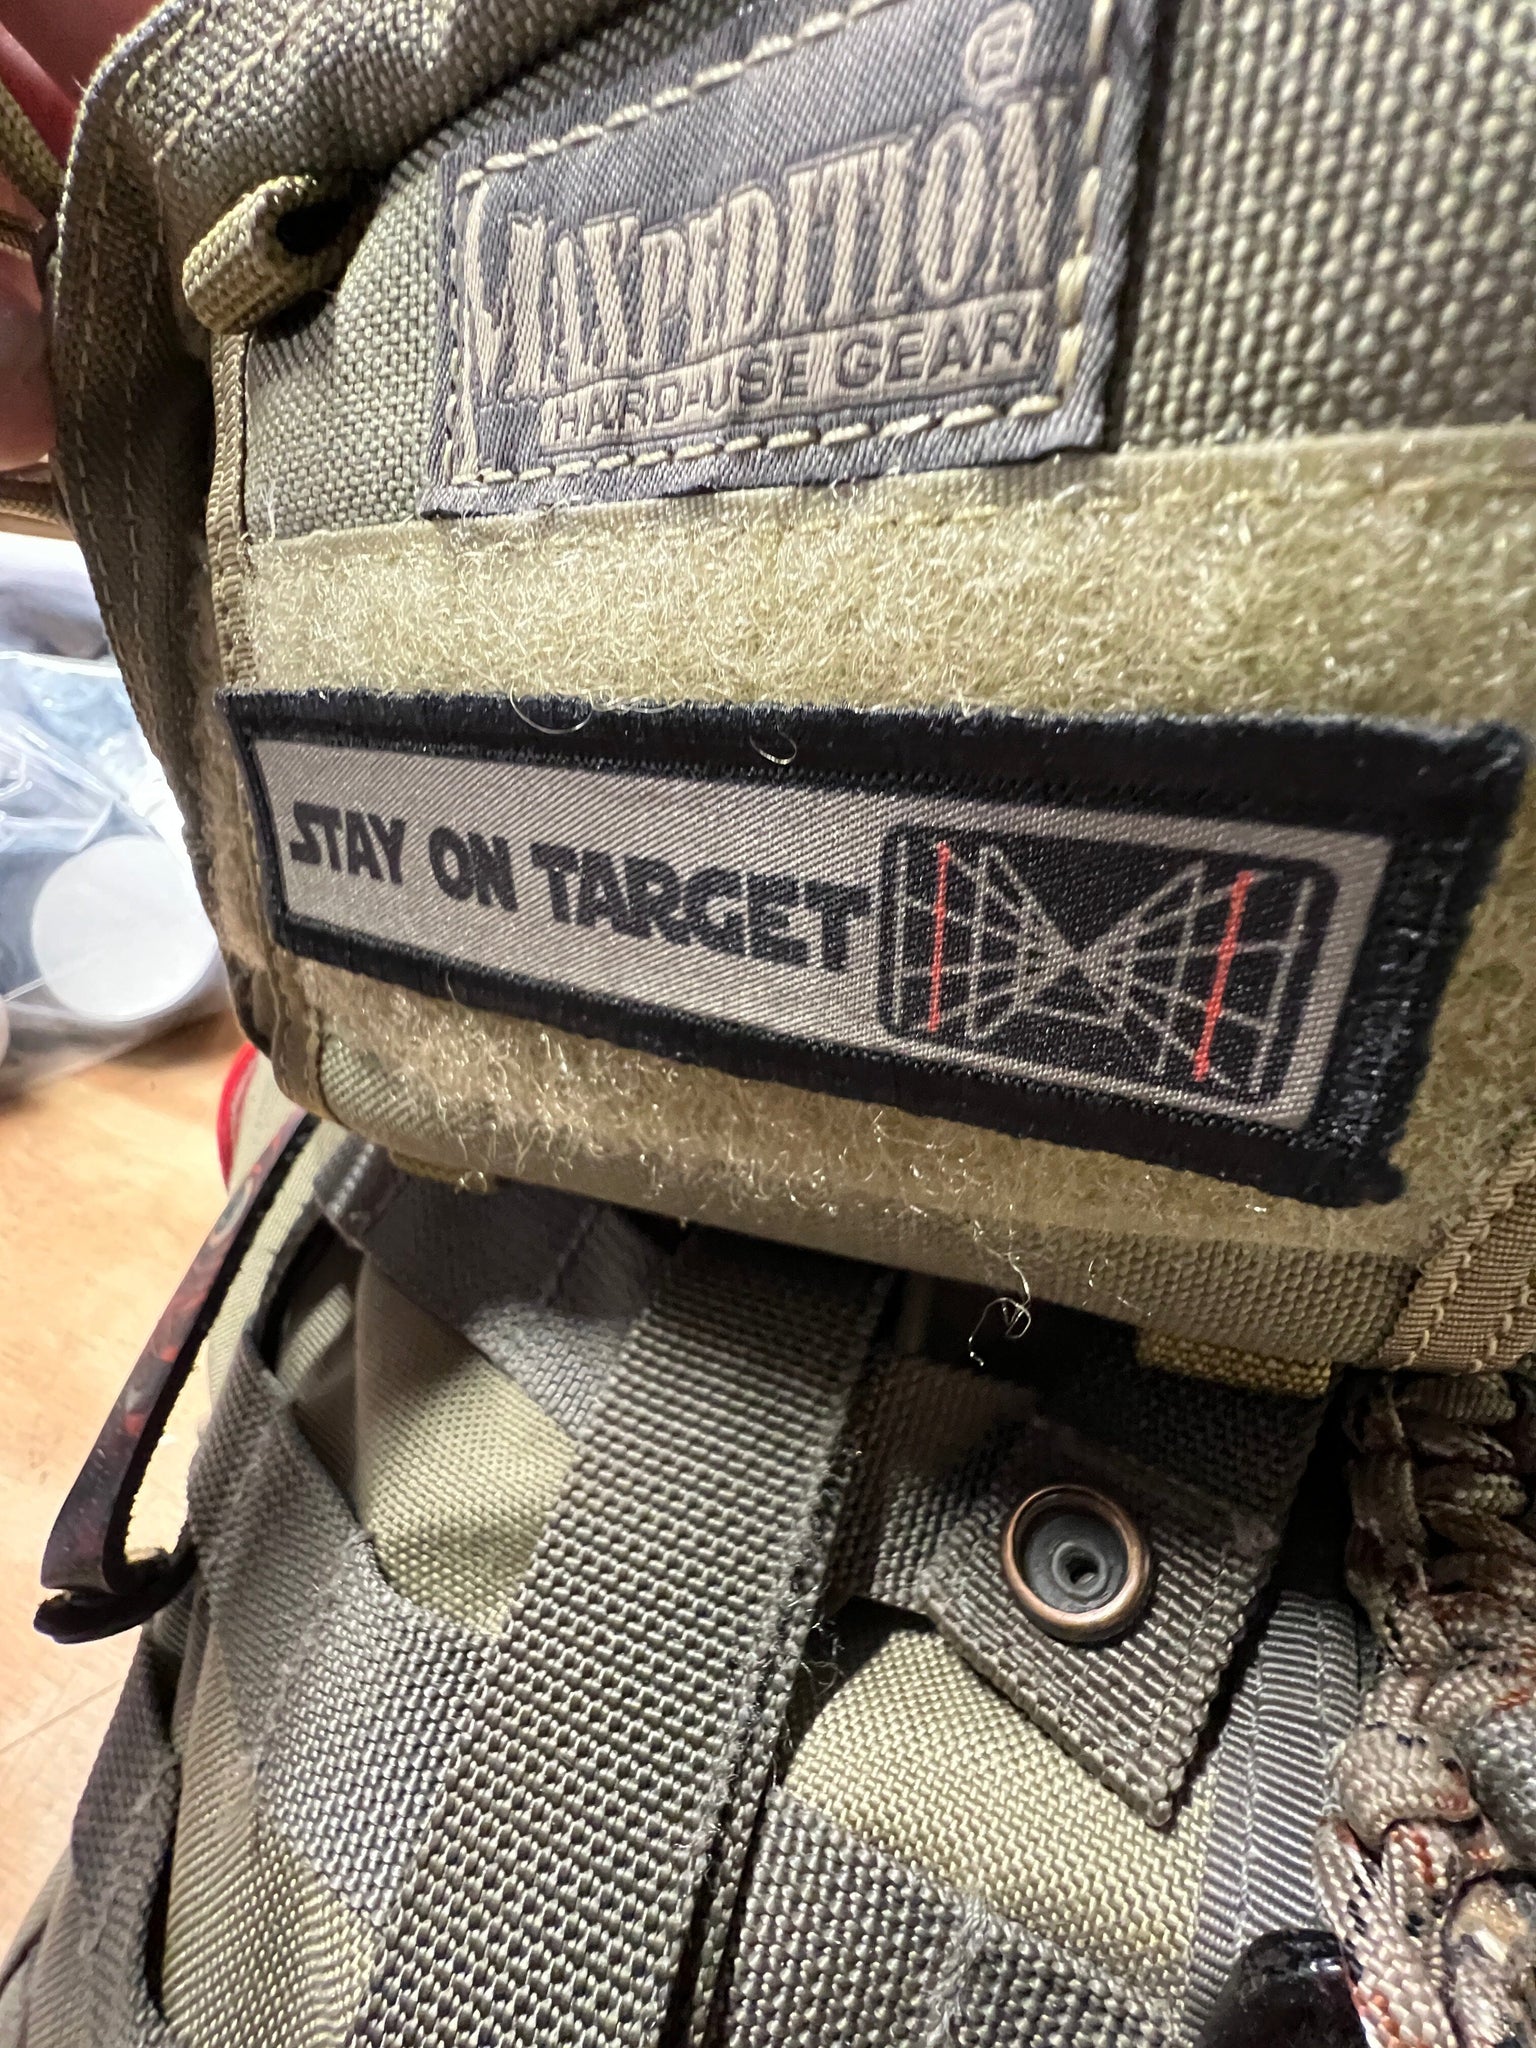 Star Wars Stay On Target Morale Patch